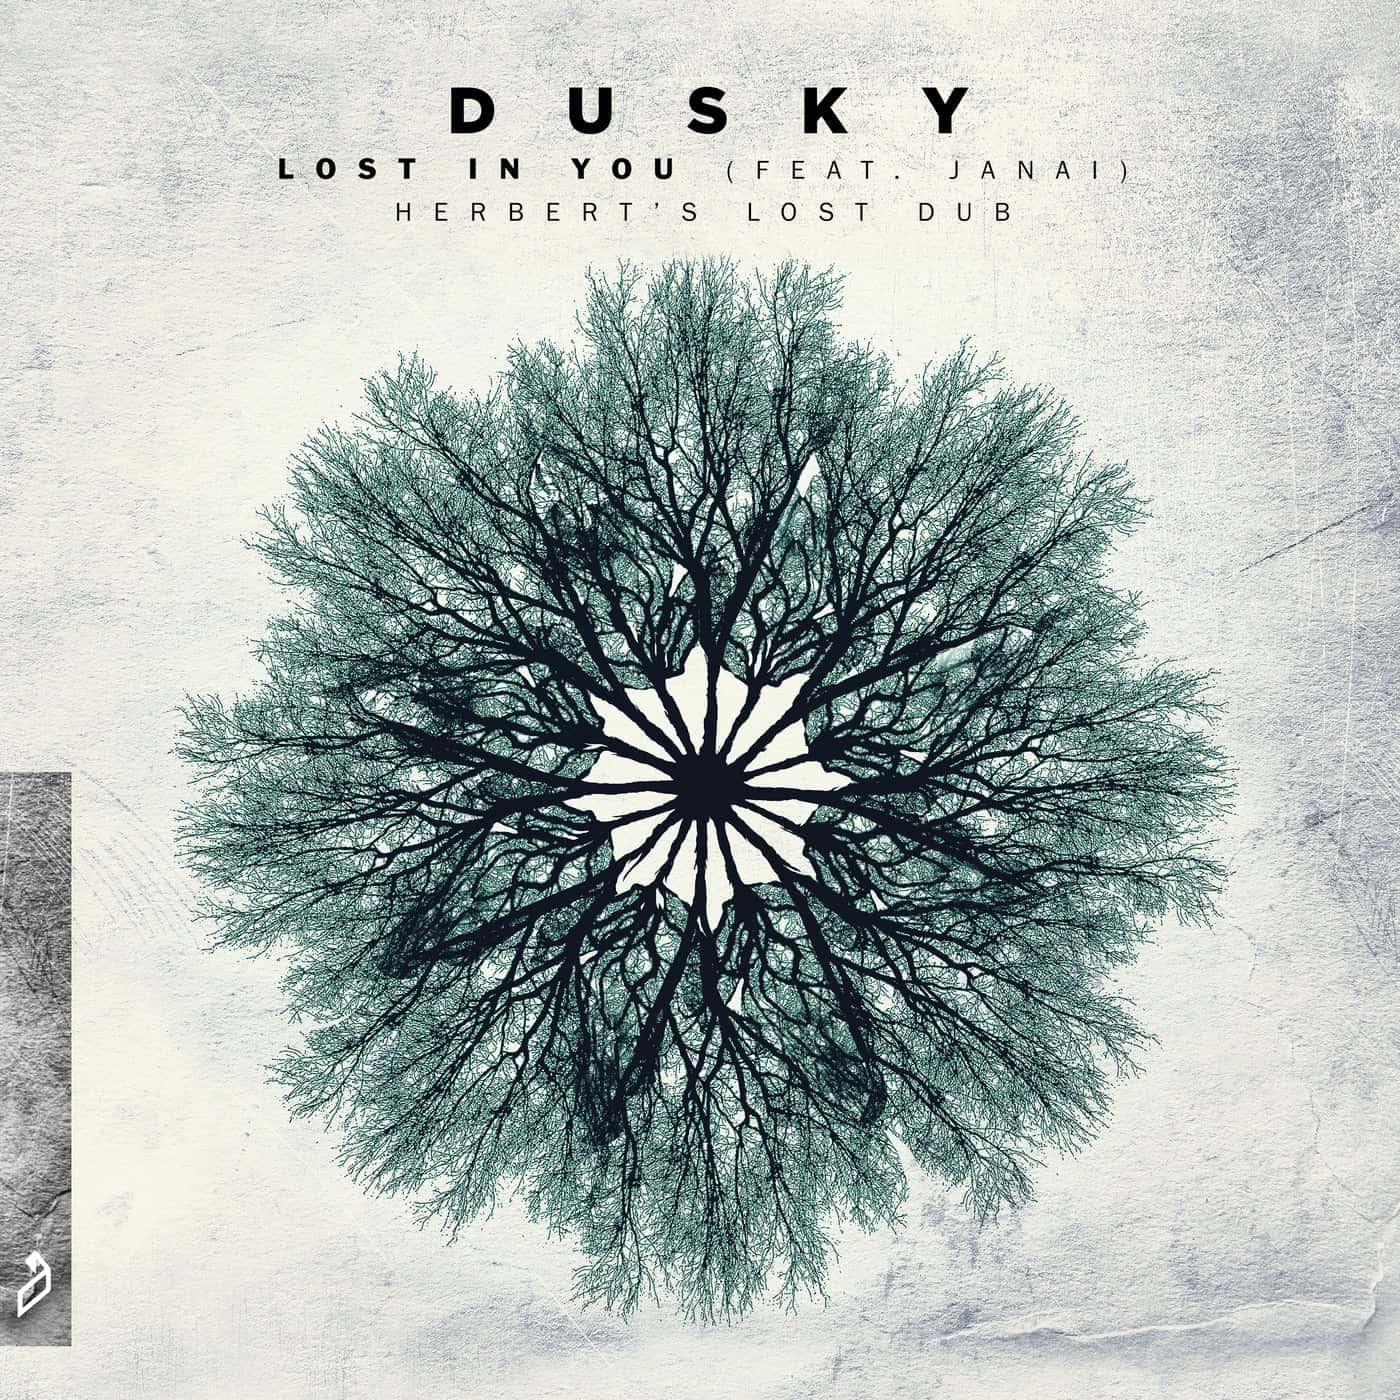 image cover: Dusky, Janai - Lost In You (Herbert's Lost Dub) / ANJDEE123RBD2